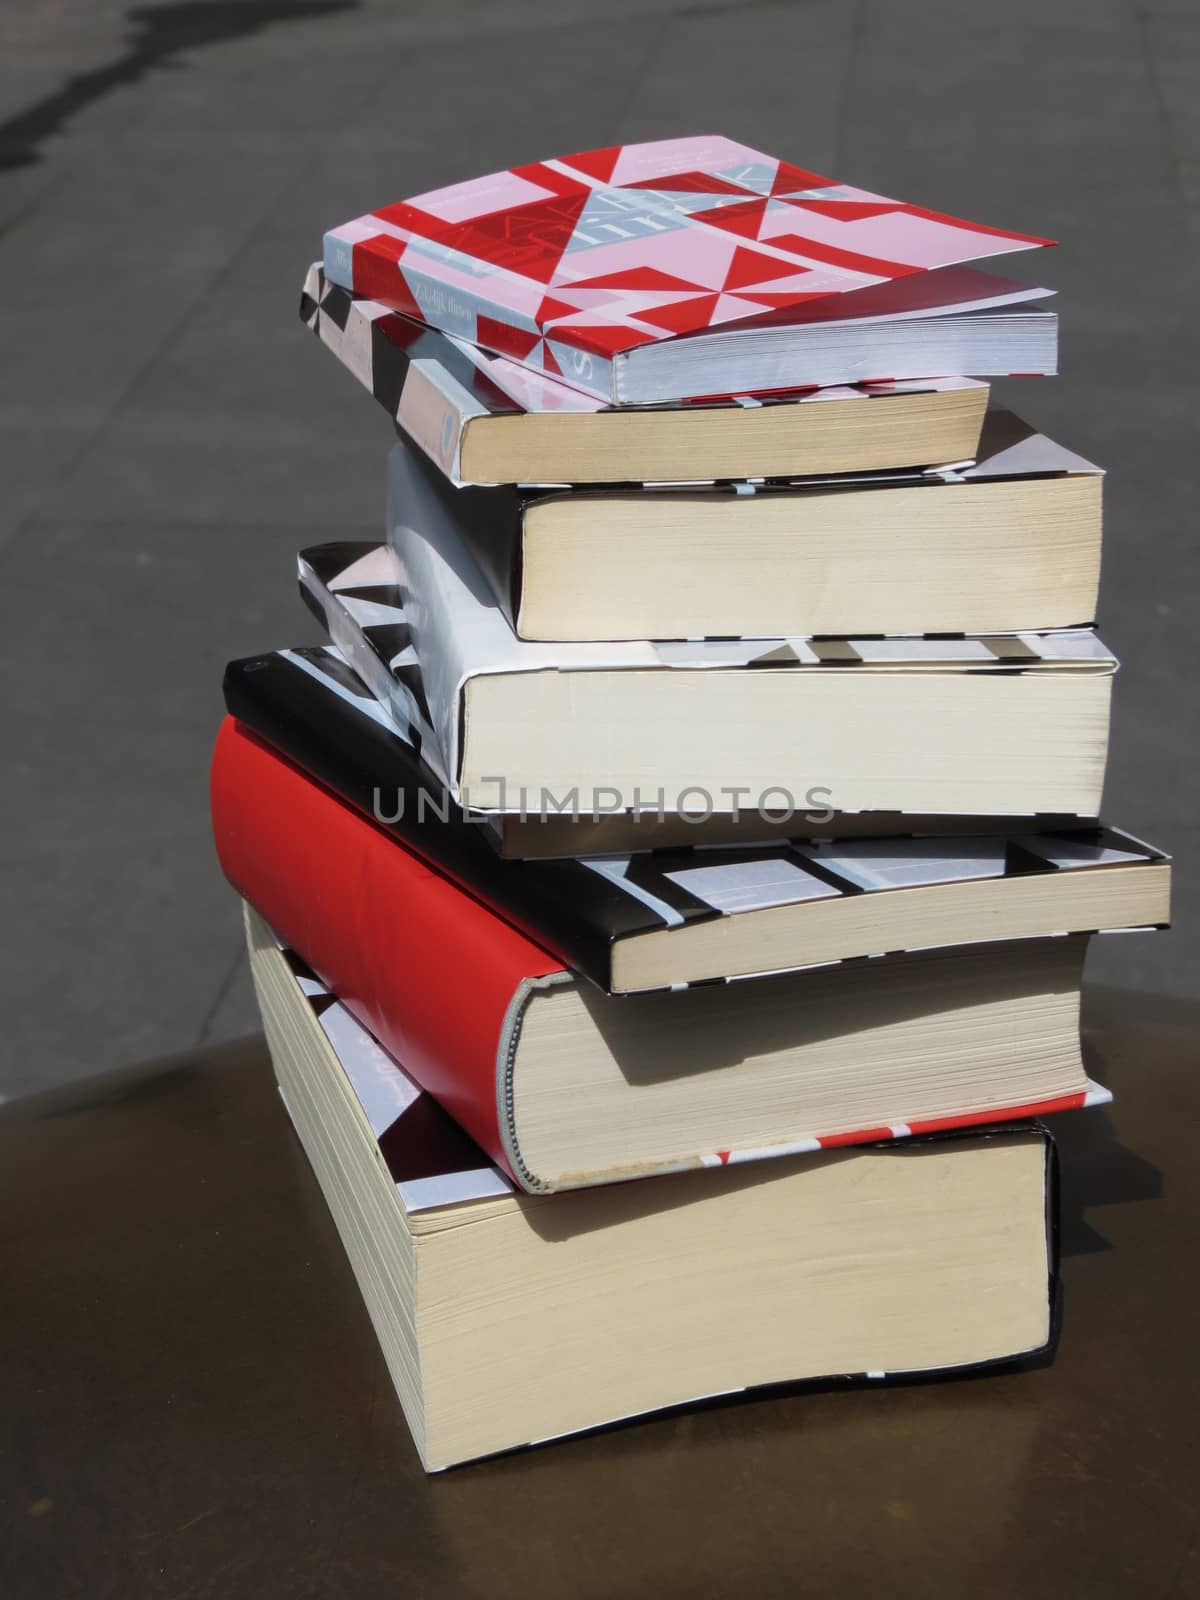 a pile of books by paolo77